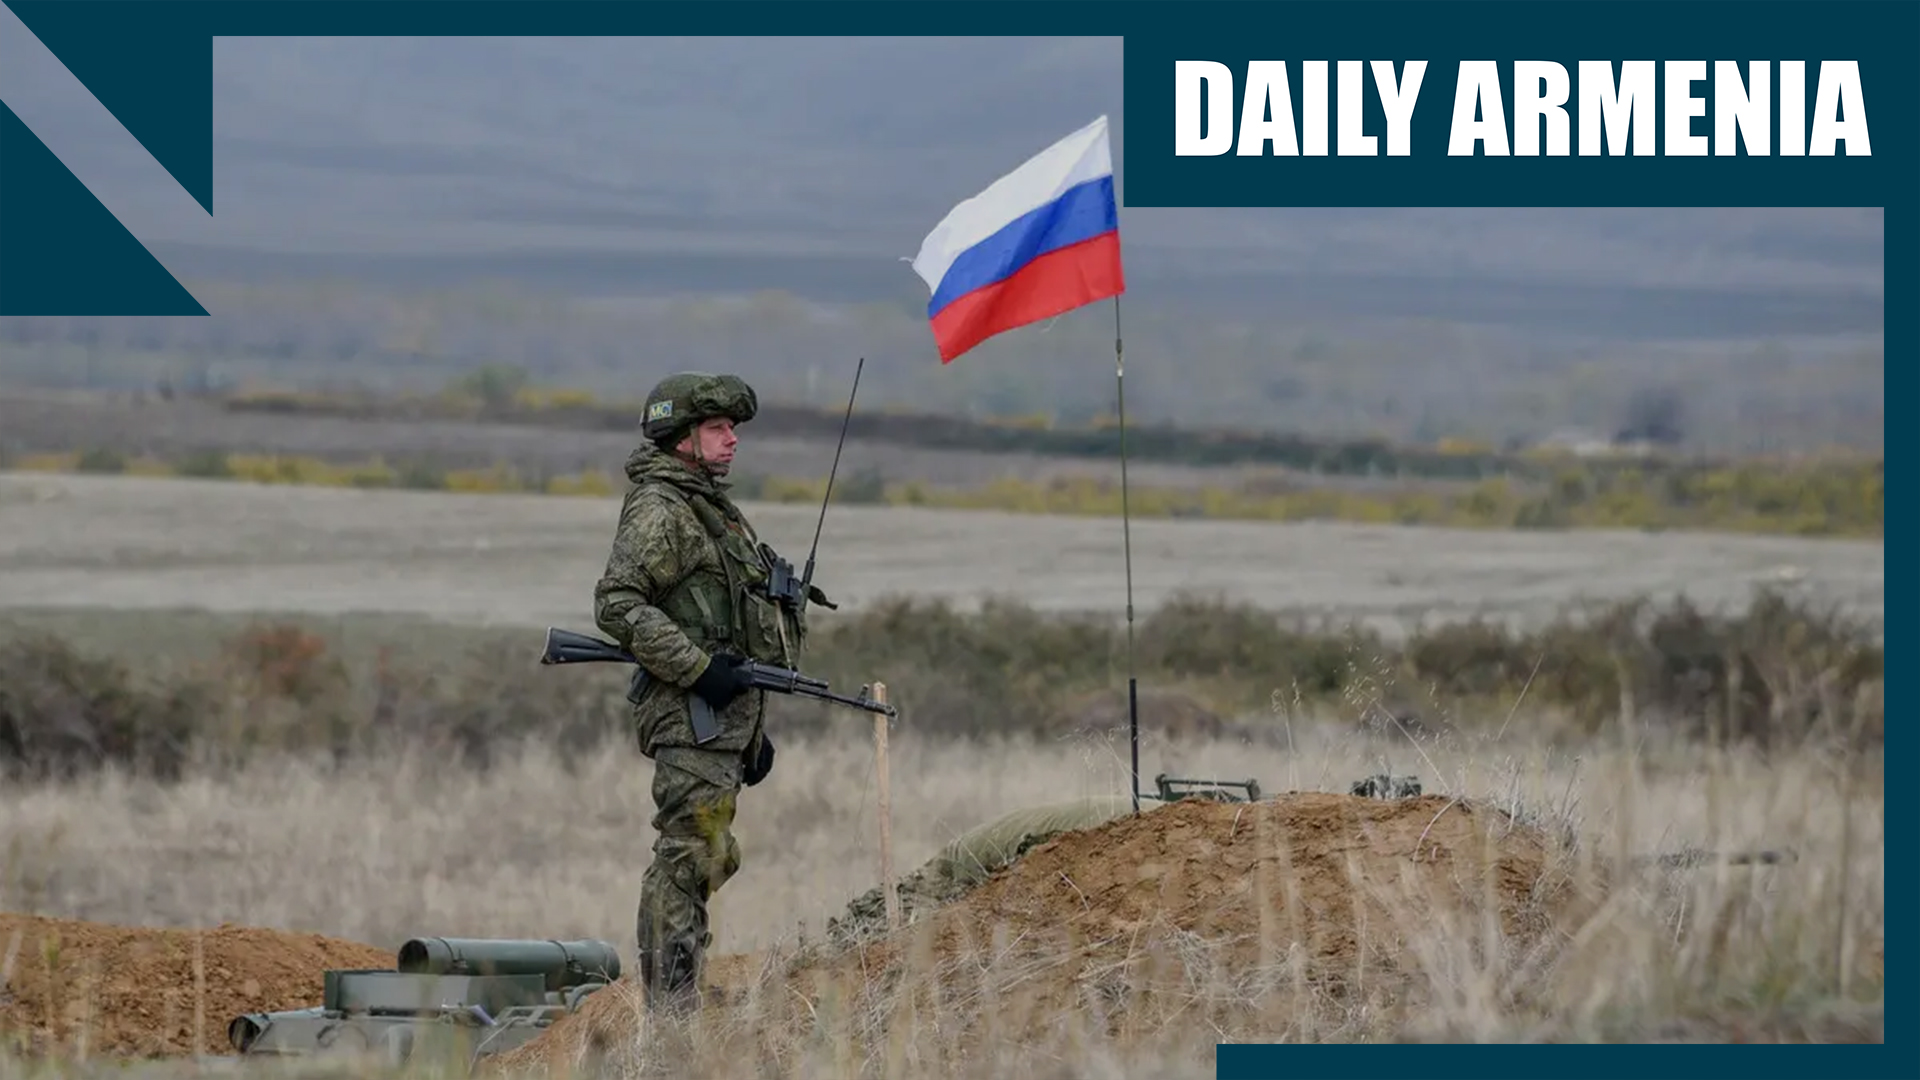 Russia to appoint new Nagorno-Karabakh commander, state media says